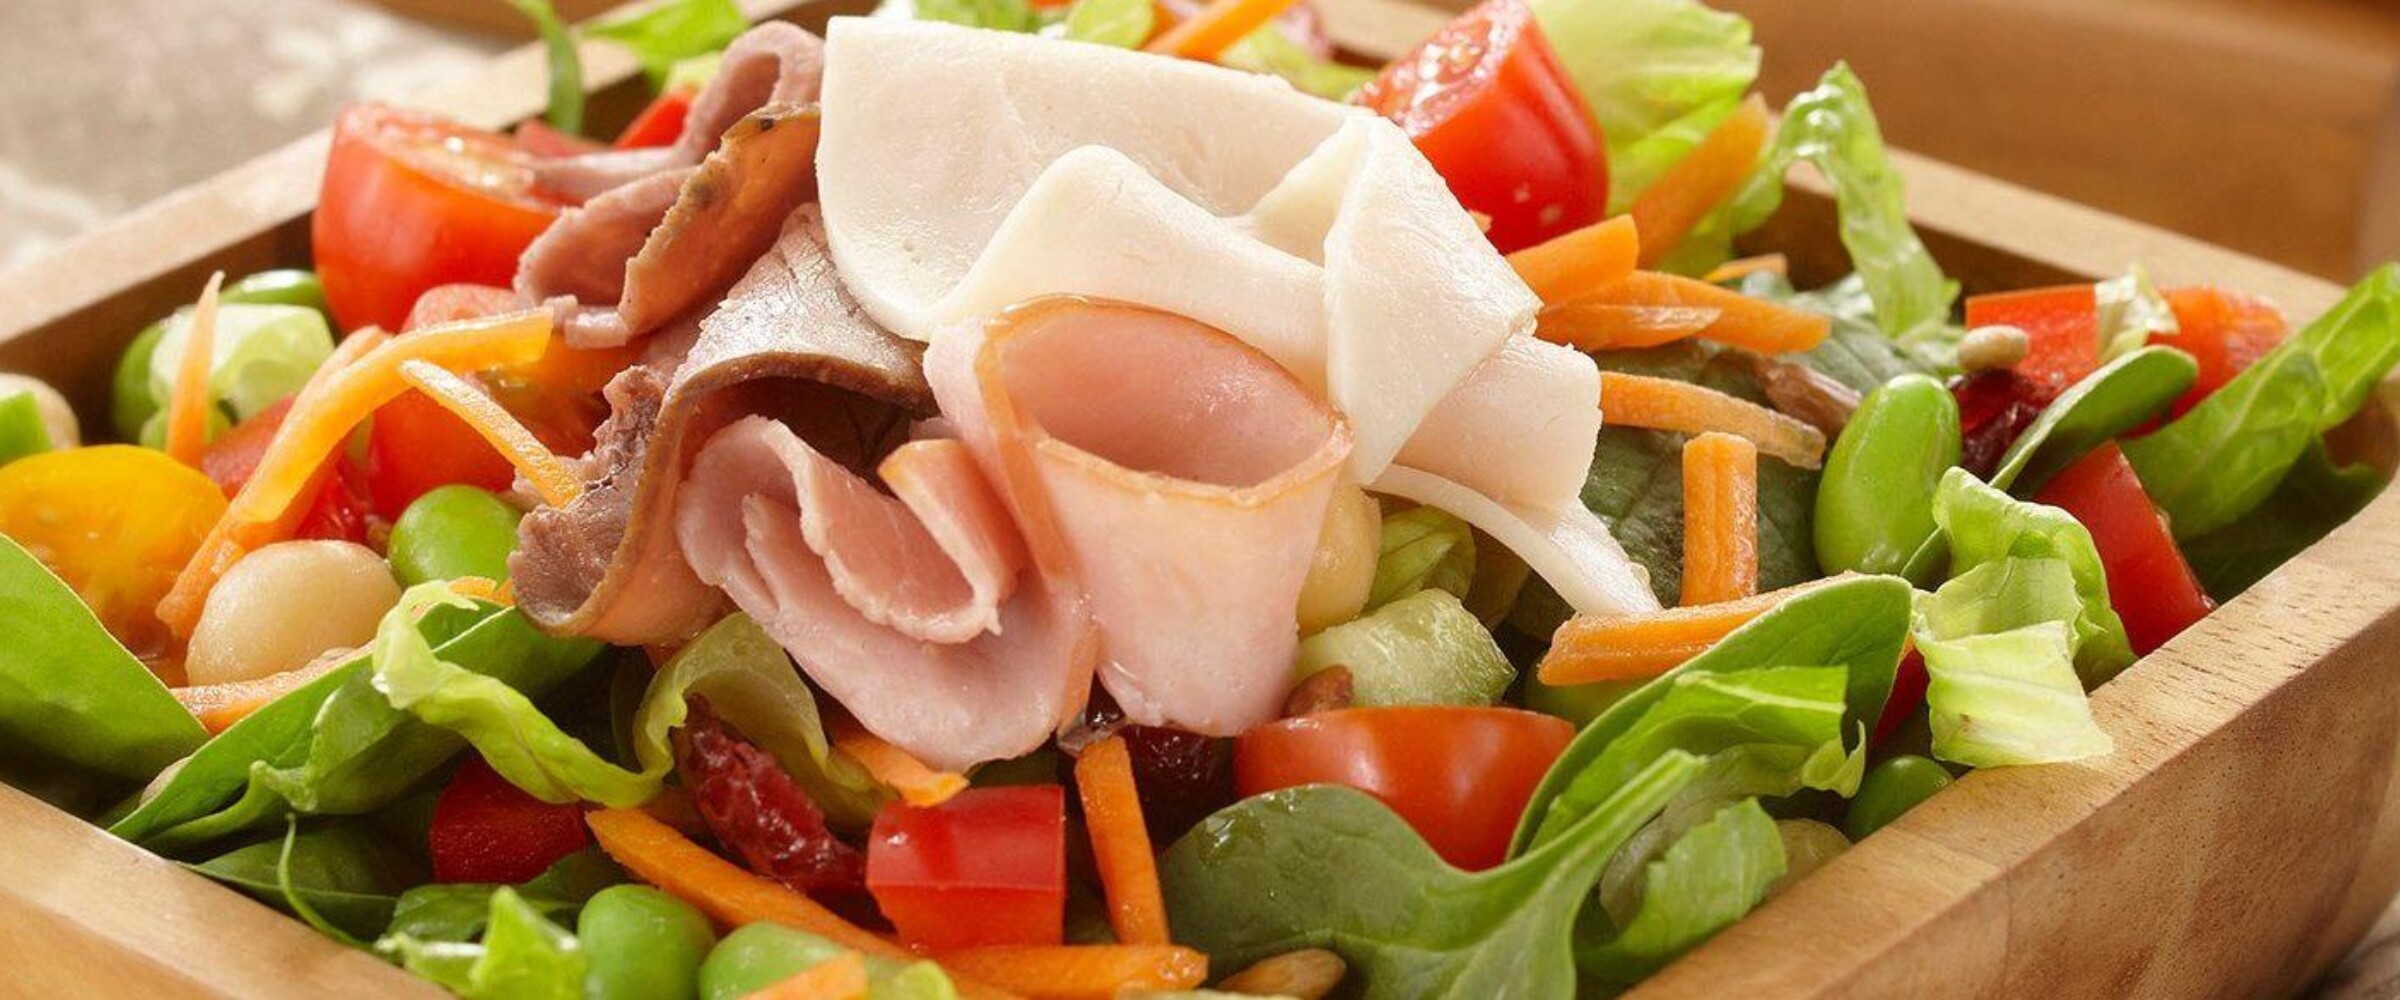 Salad with sliced meat